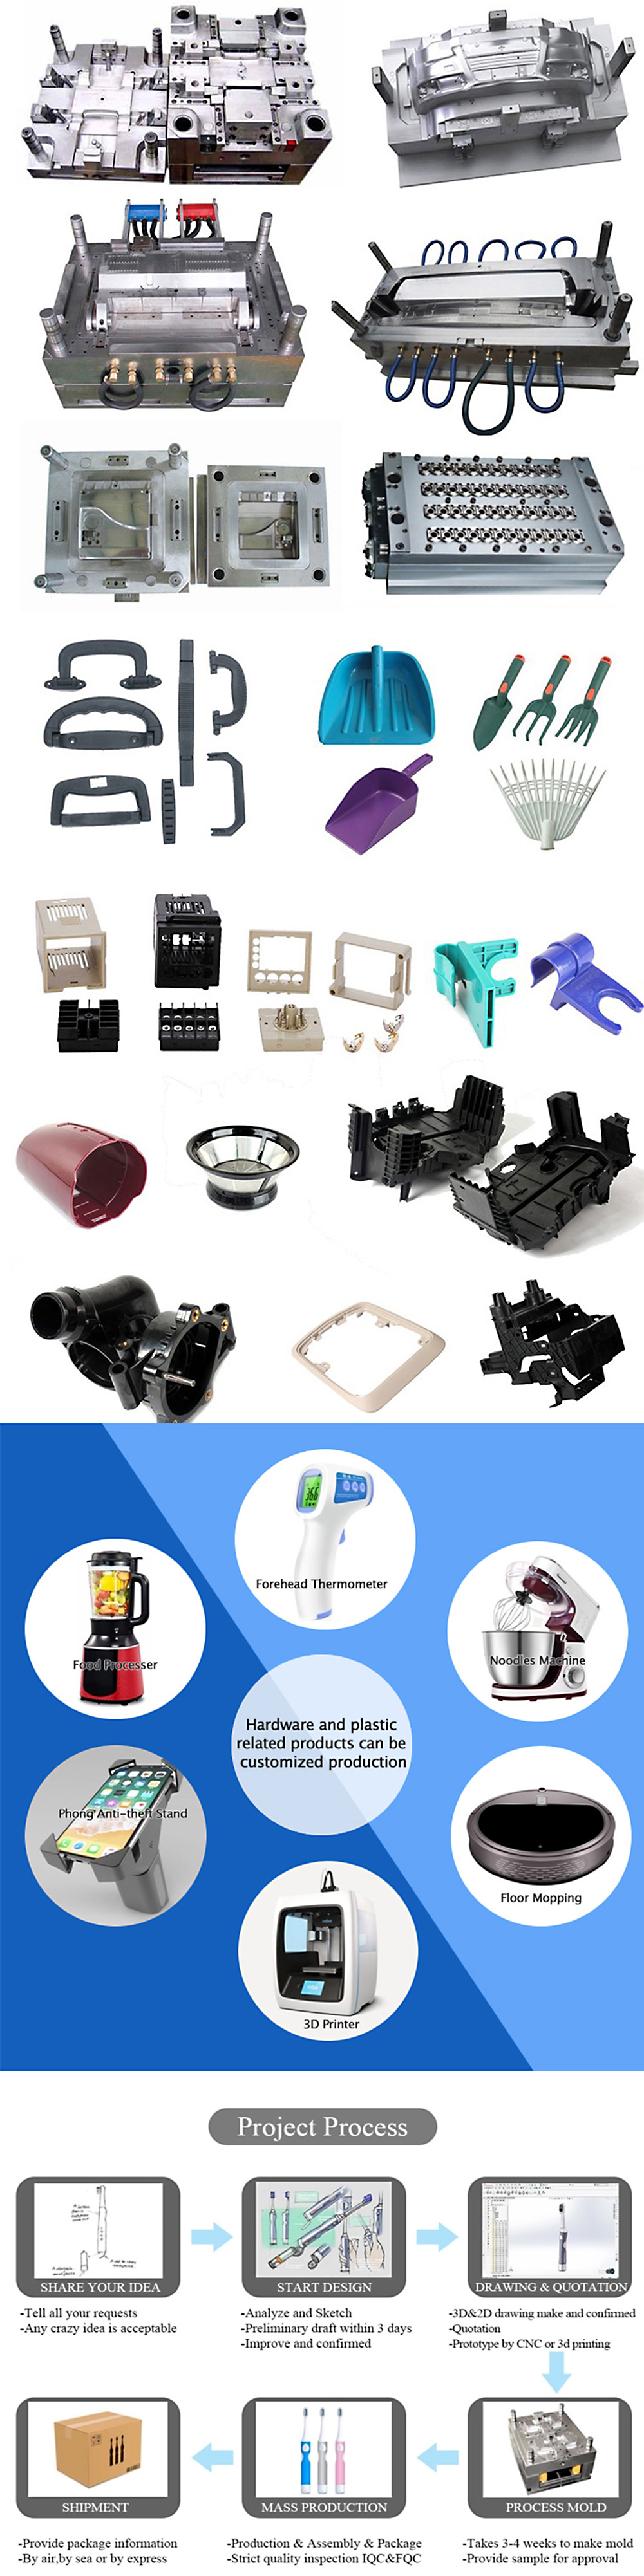 injection molding mechine | injection molding compagny | plastic injection molding process service